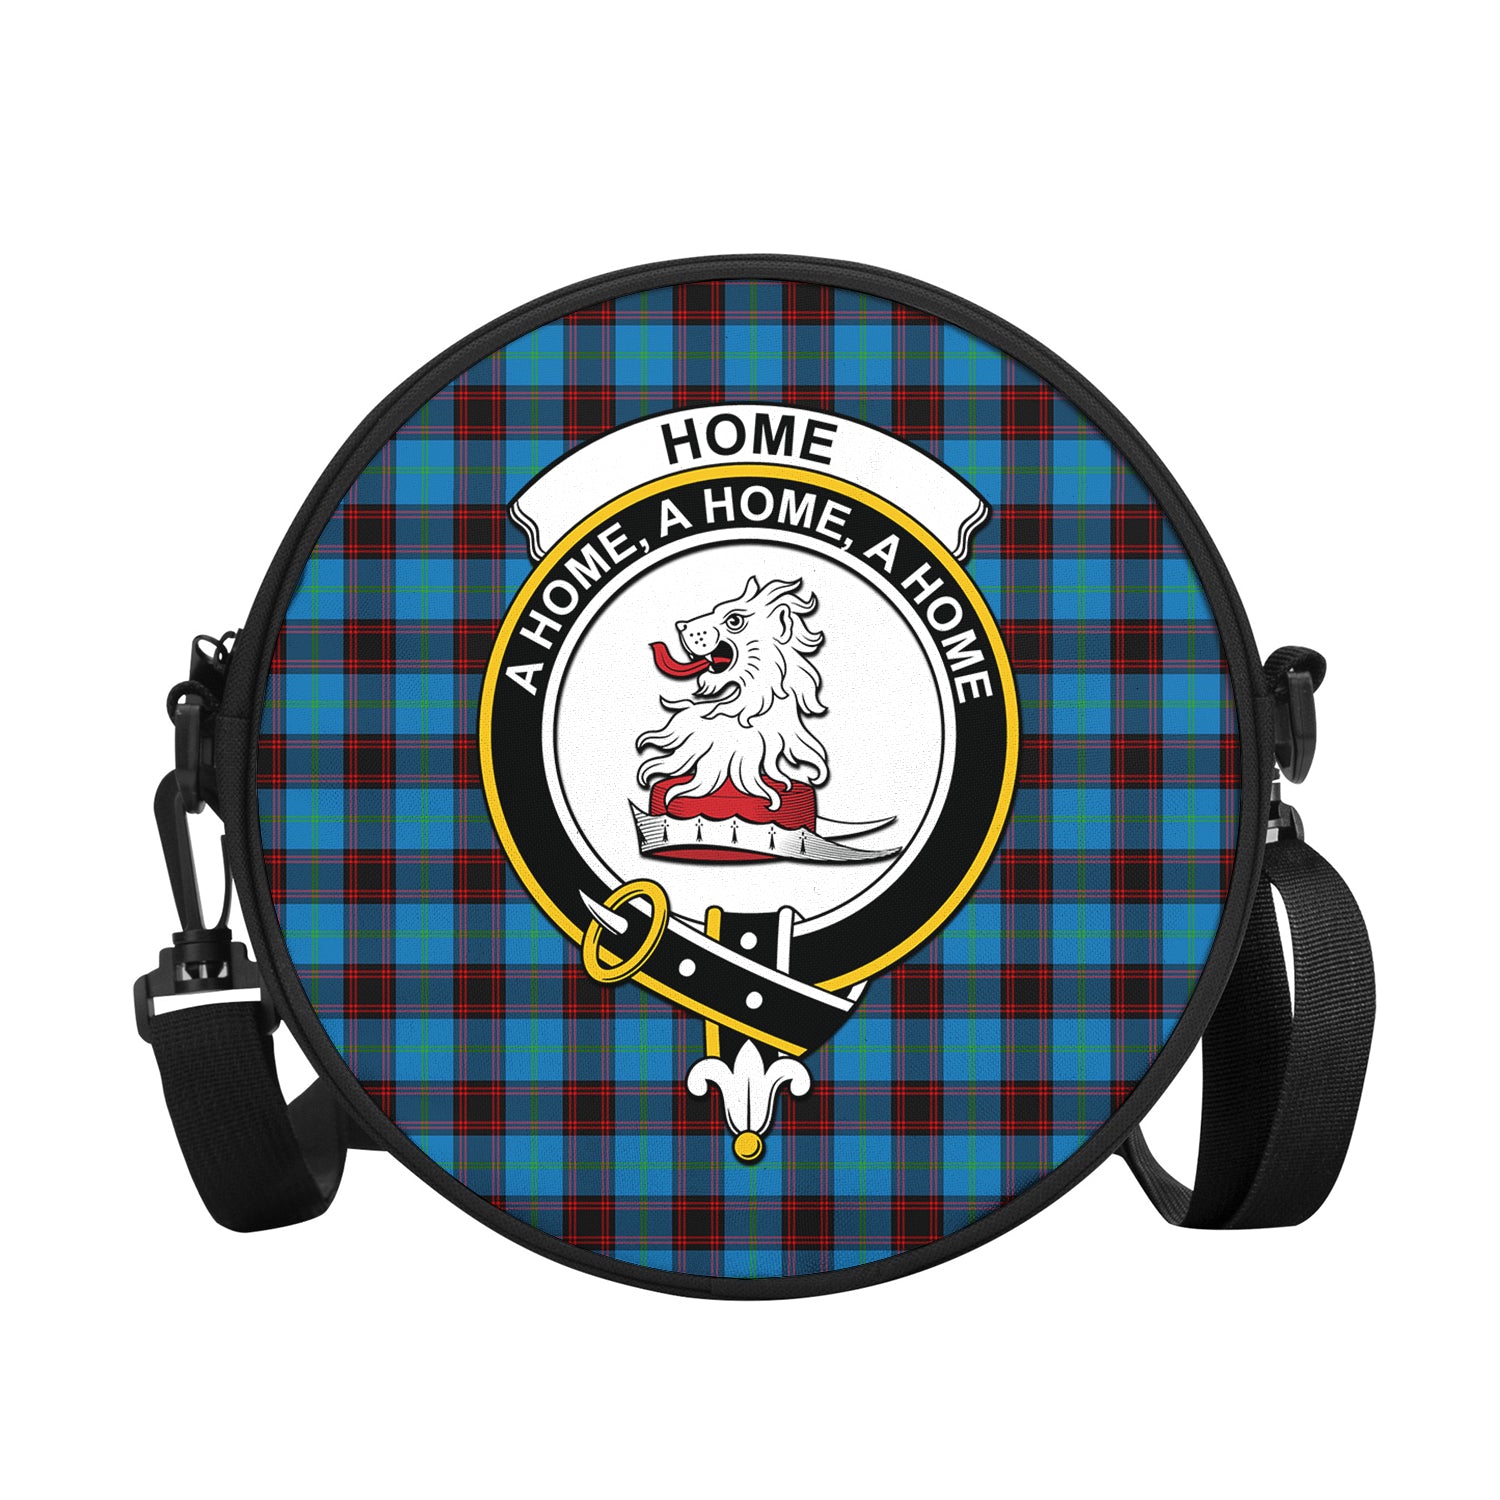 home-ancient-tartan-round-satchel-bags-with-family-crest